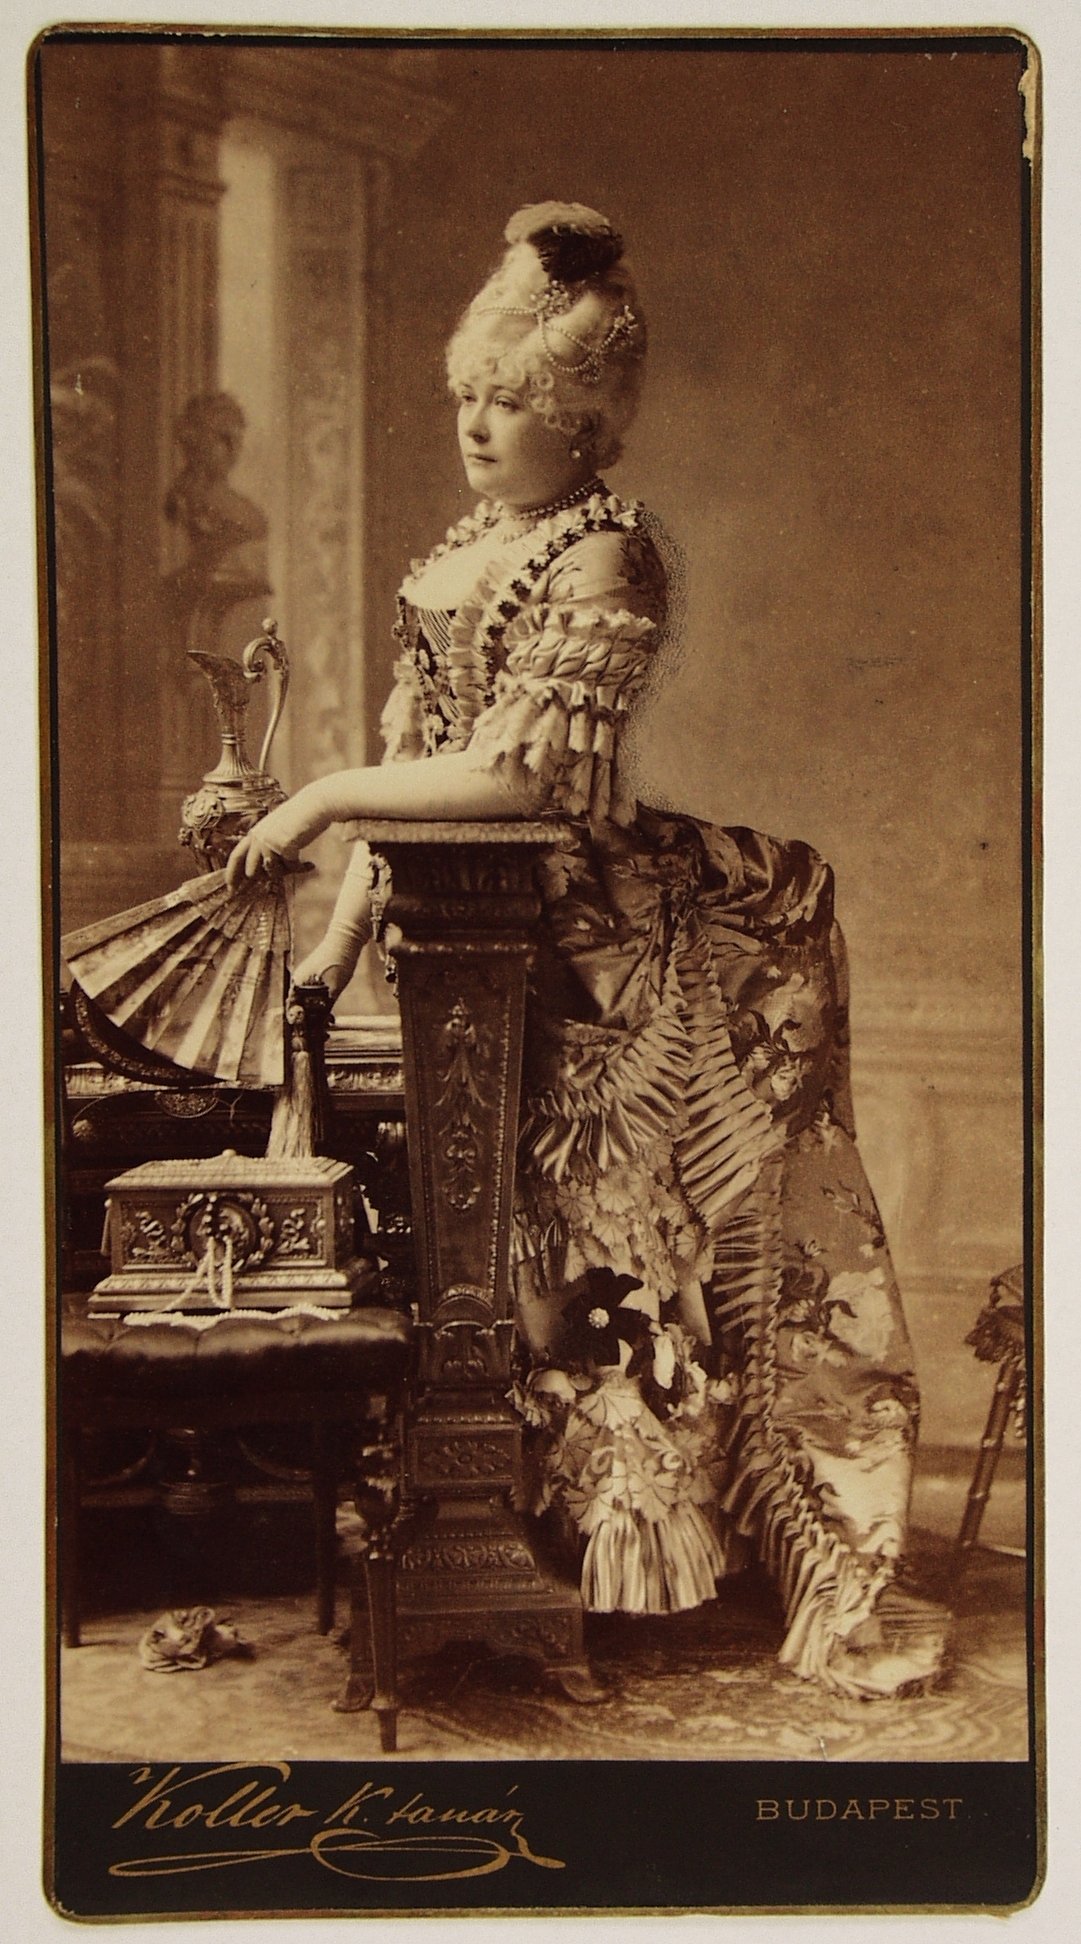  National Archives of Hungary, Festetics family archives, Baroness Lo Presti  as Madame Pompadour, 1885